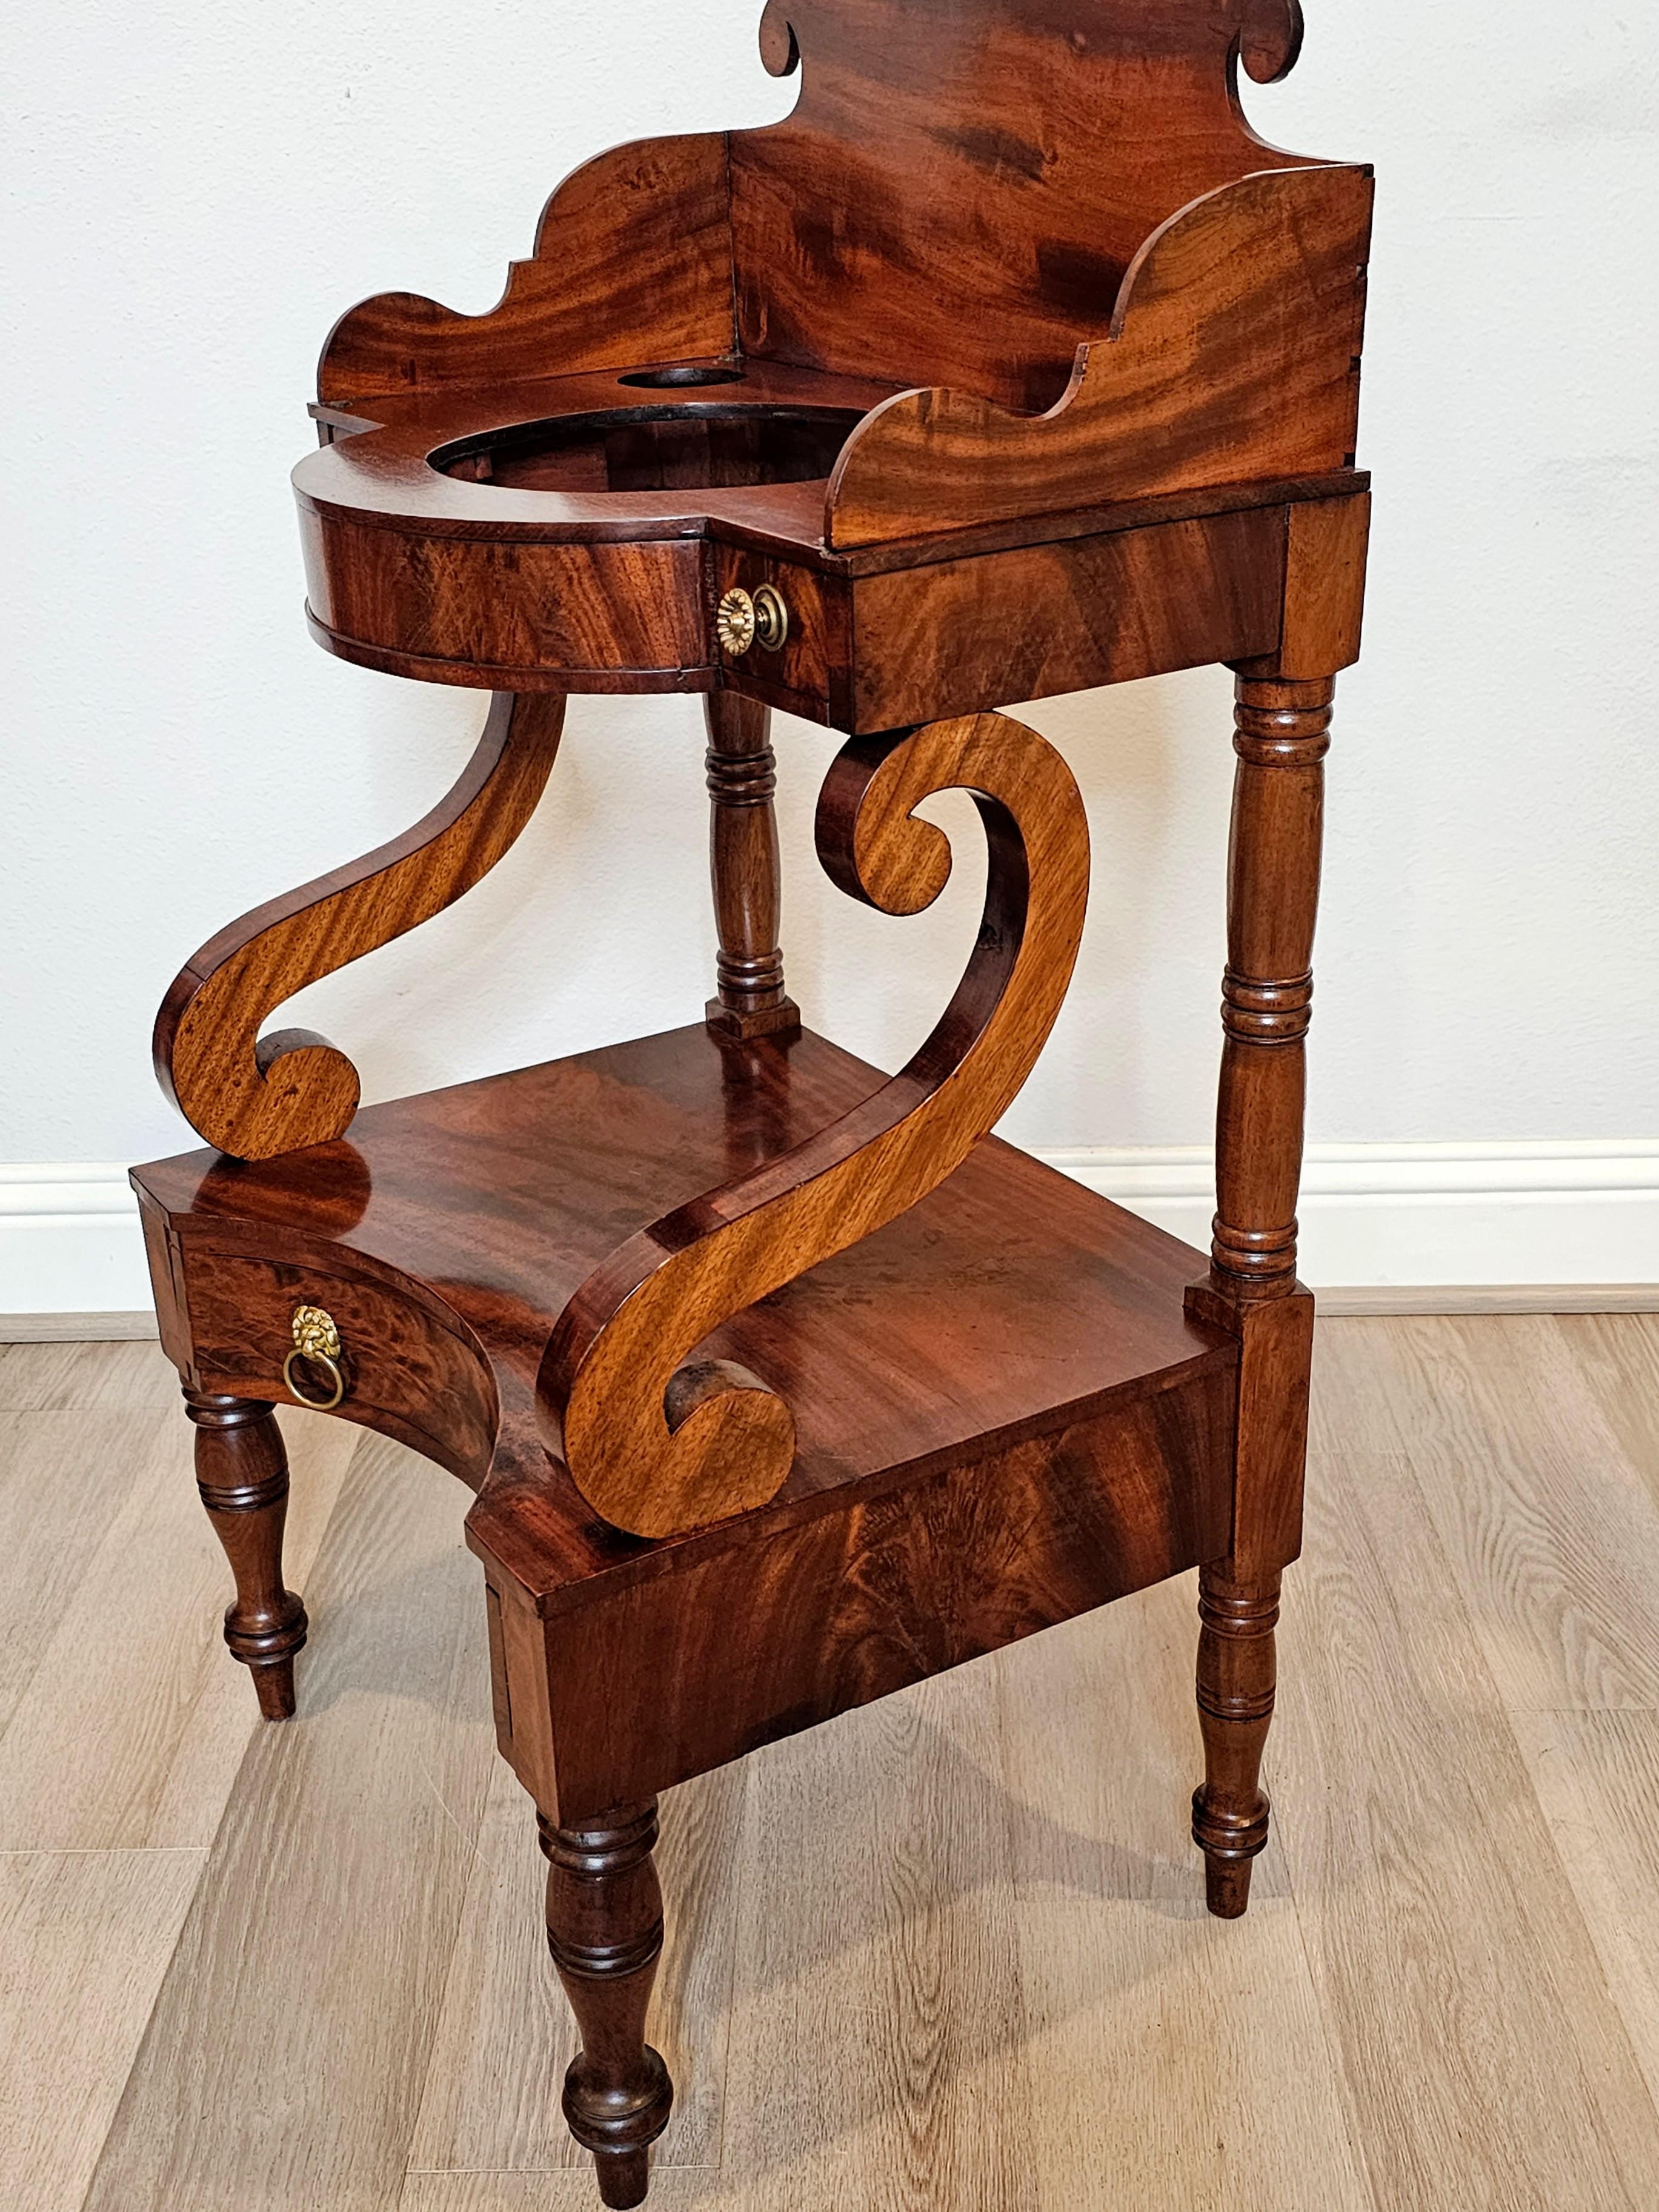 A rare and stunning Federal period (1789-1823) early American flame mahogany wash stand. circa 1810

Exquisitely hand-crafted in the Northeastern United States in the early 19th century, fine quality craftsmanship and construction with superb detail